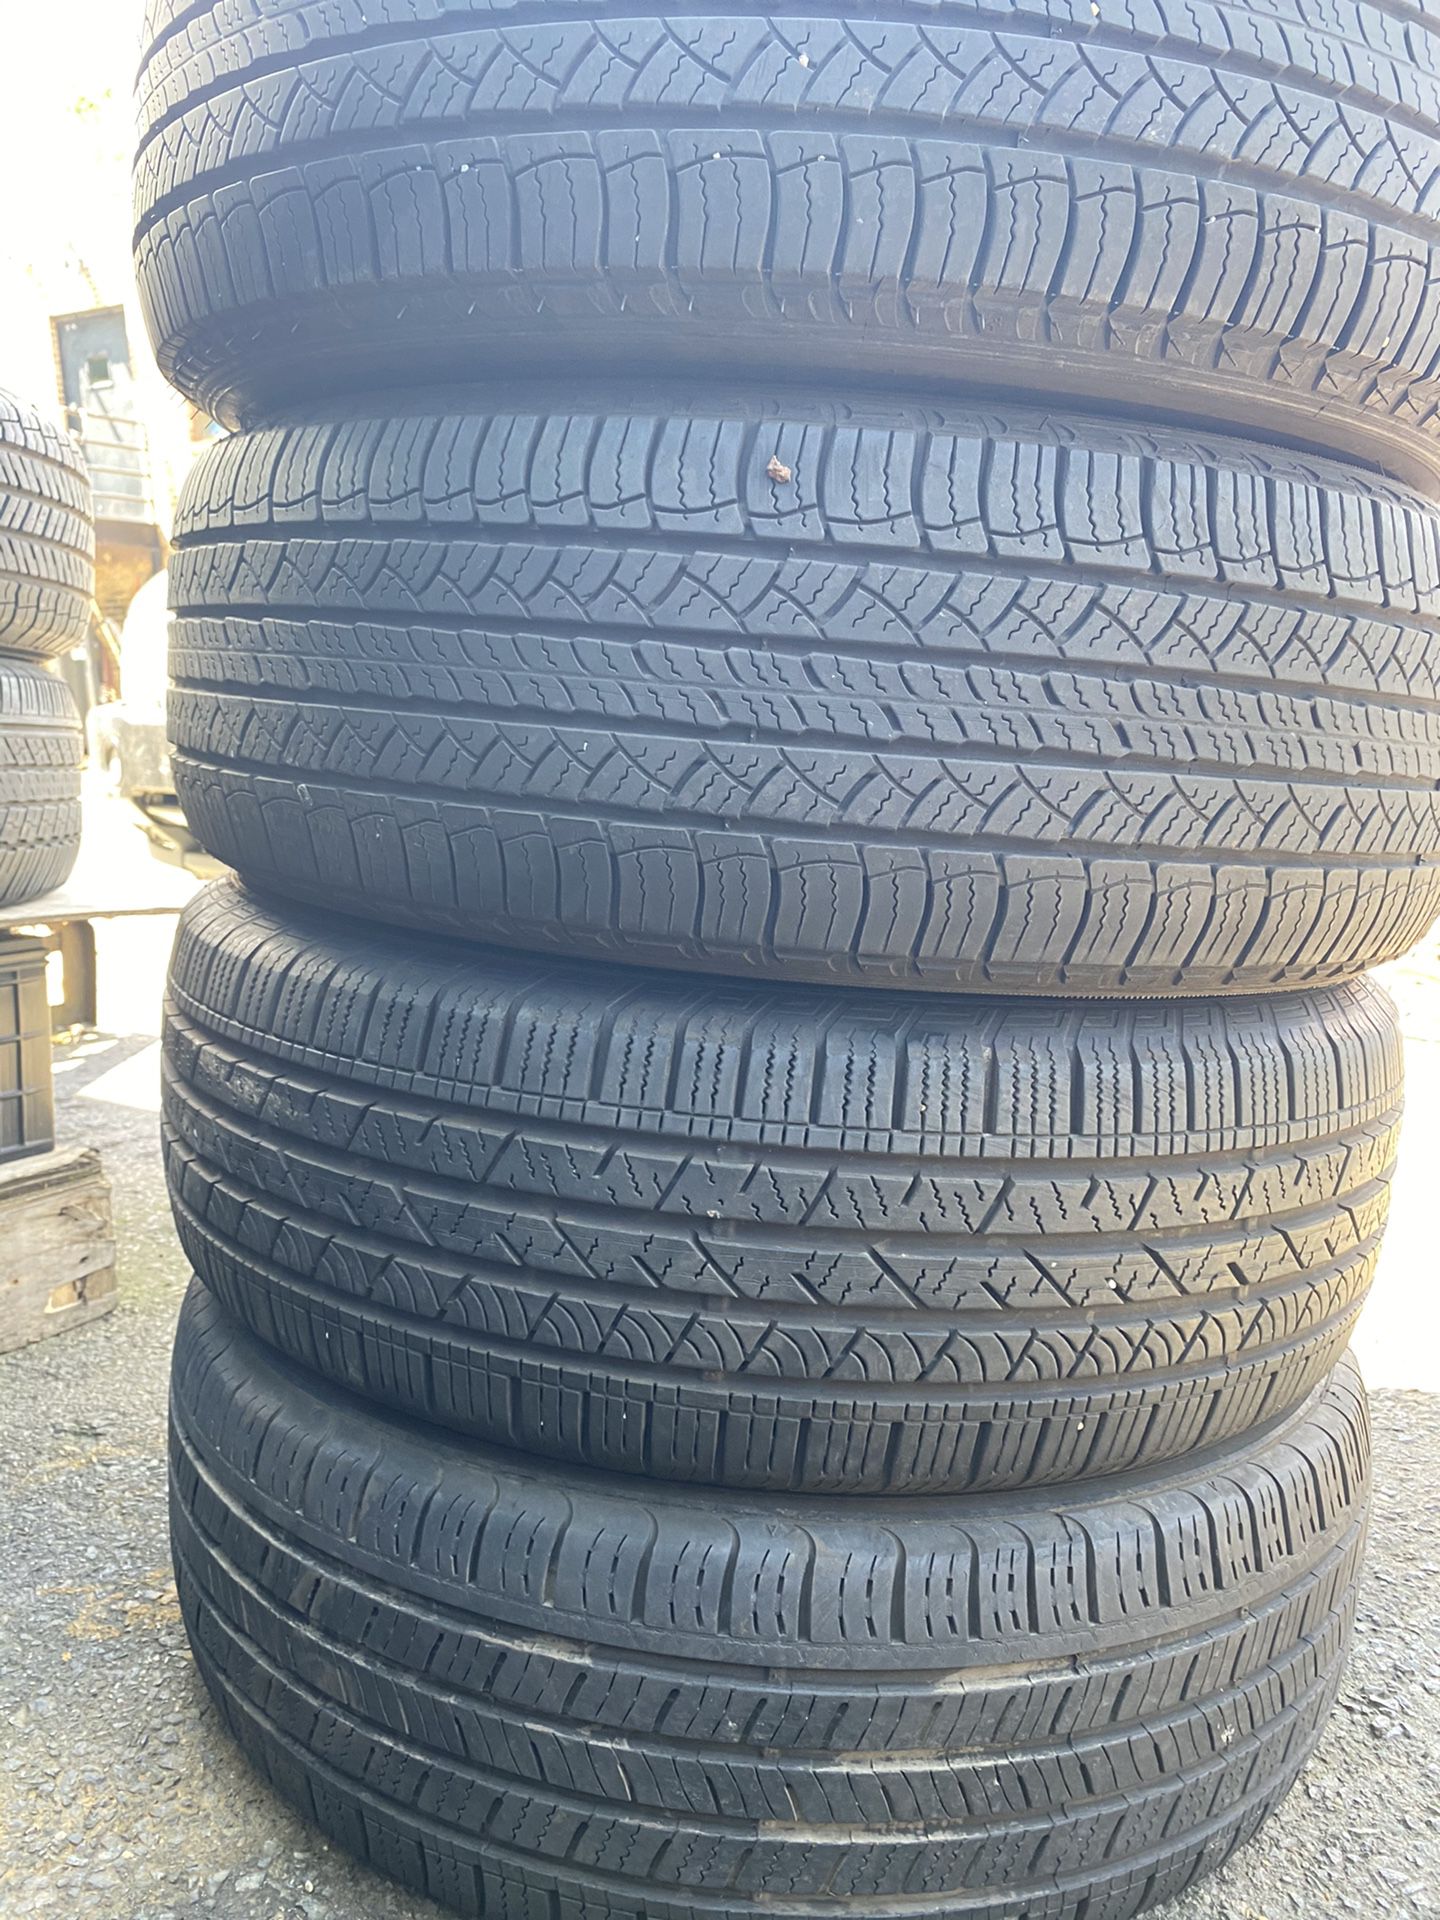 Set 4 usted tire 235/65R18 two Michelin end two Continental one have patch end the other have two patch set 4 used tire $200